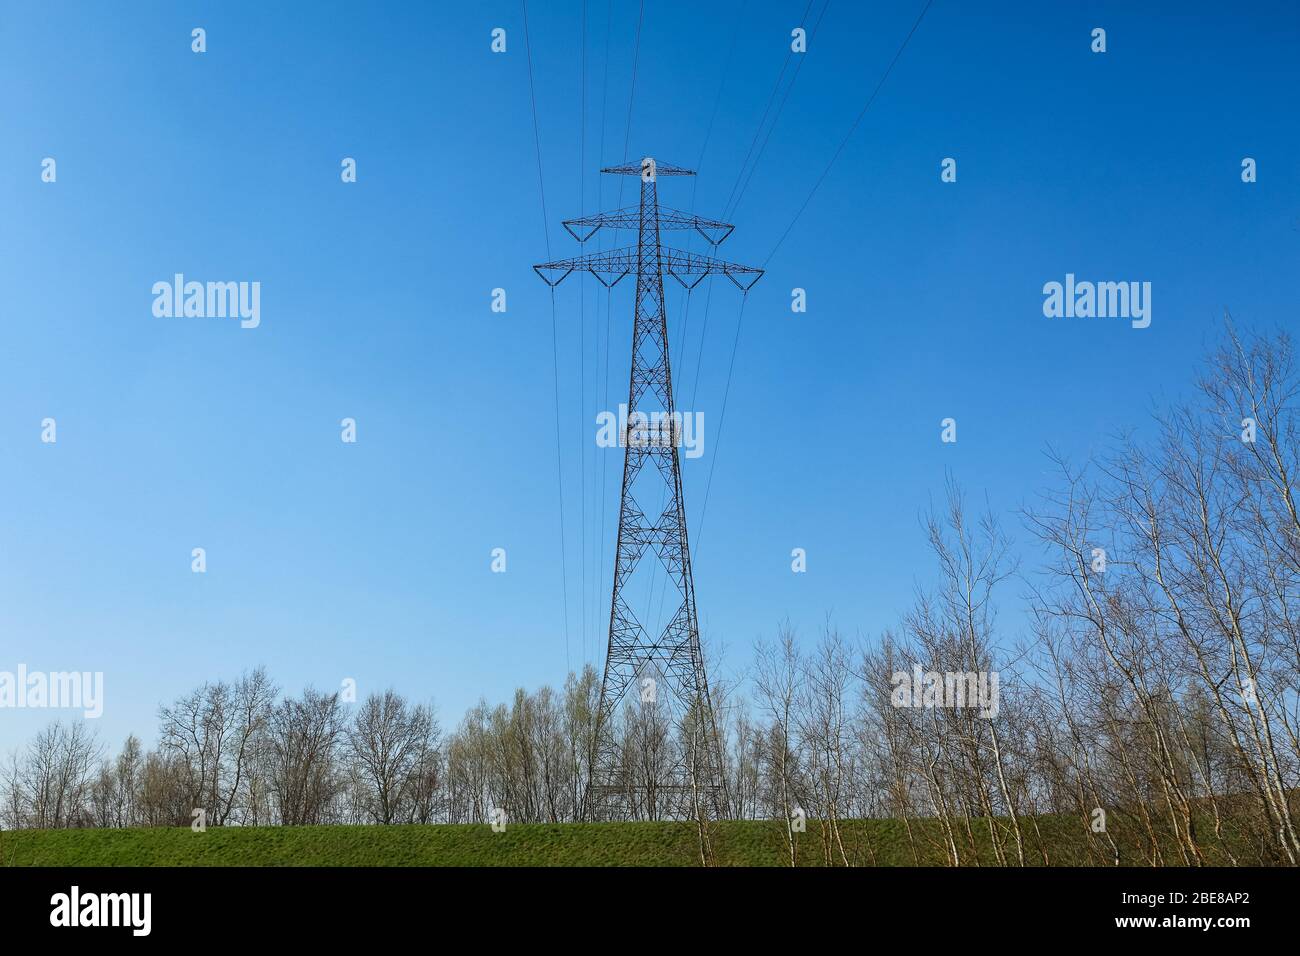 07 Apr 2020. High voltage pylon with power lines for transporting electricity in the Poland landscape. Credit: Waldemar Sikora Stock Photo